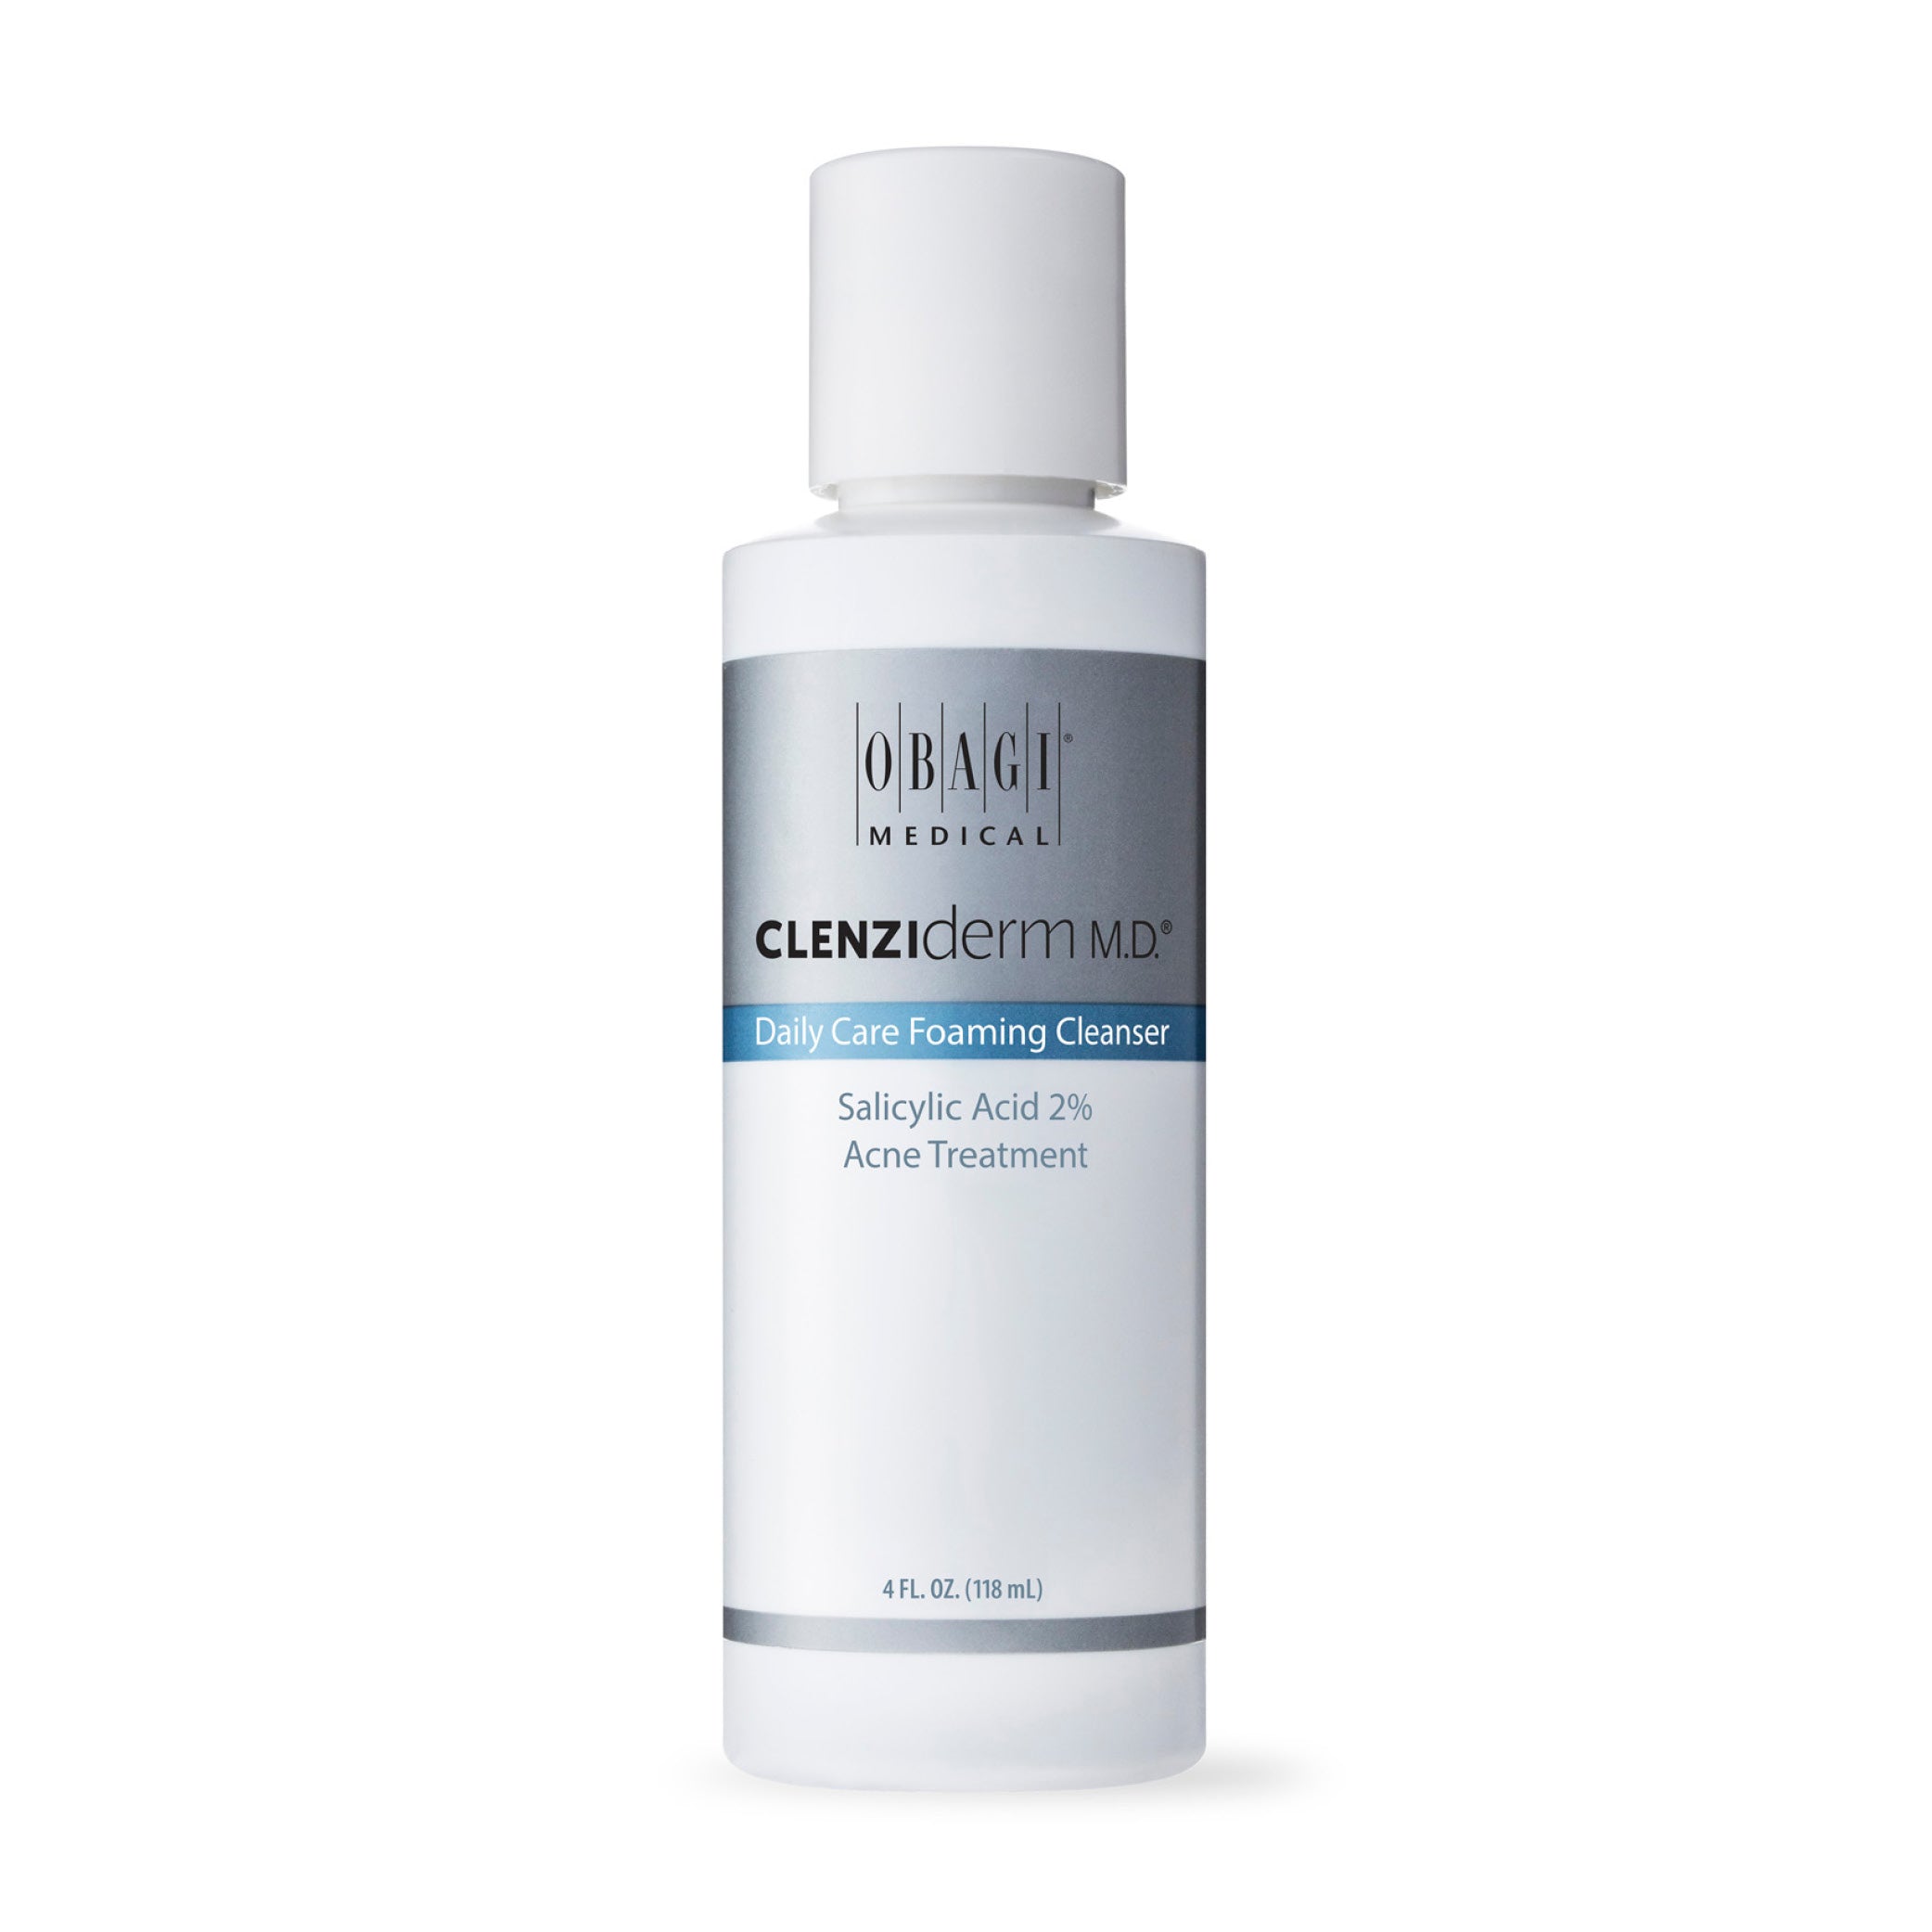 CLENZIderm M.D. Daily Care Foaming Cleanser